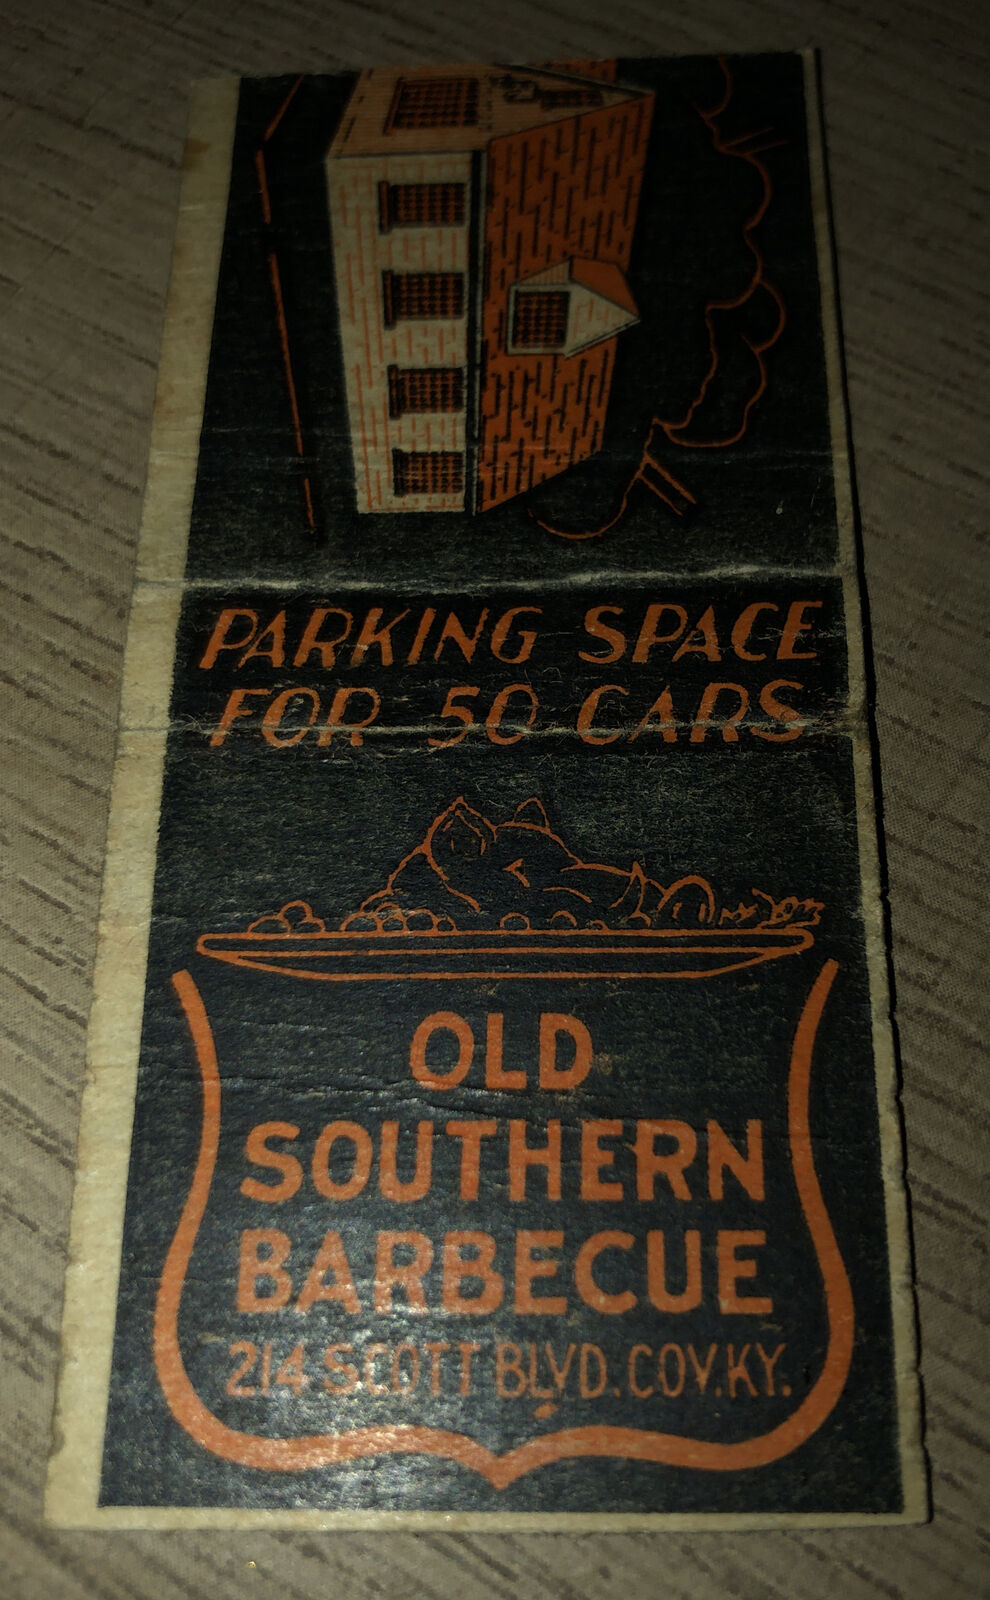 1930s-40s Old Southern Barbecue Matchbook Cover Covington Kentucky